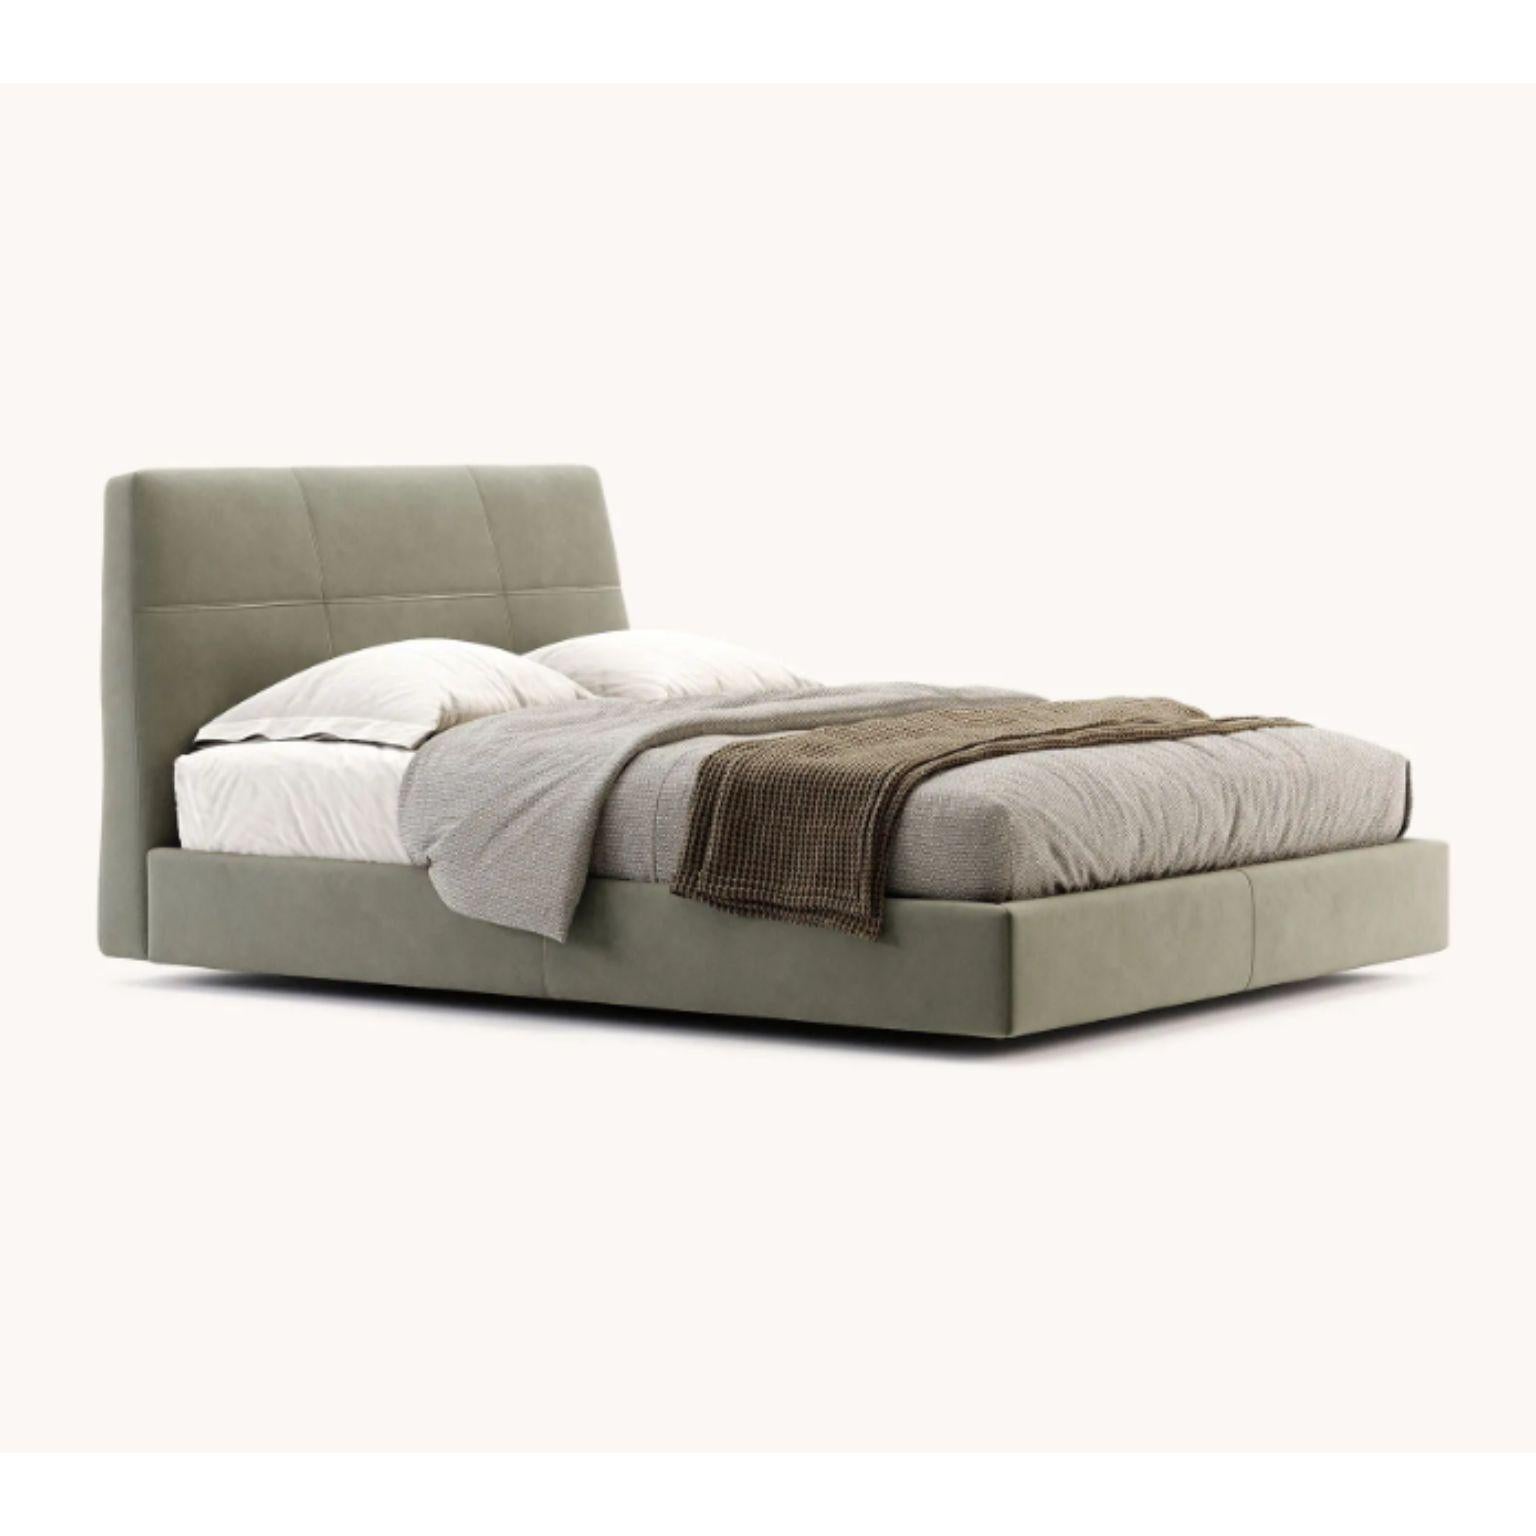 King size Shelby bed by Domkapa
Dimensions: W 213 x D 232 x H 109 cm.
Materials: Microfiber (Tarn 22, Tarn 02).
Also available in different materials.

The unique Shelby bed is a sophisticated bed inspired by the geometric lines, angles, and